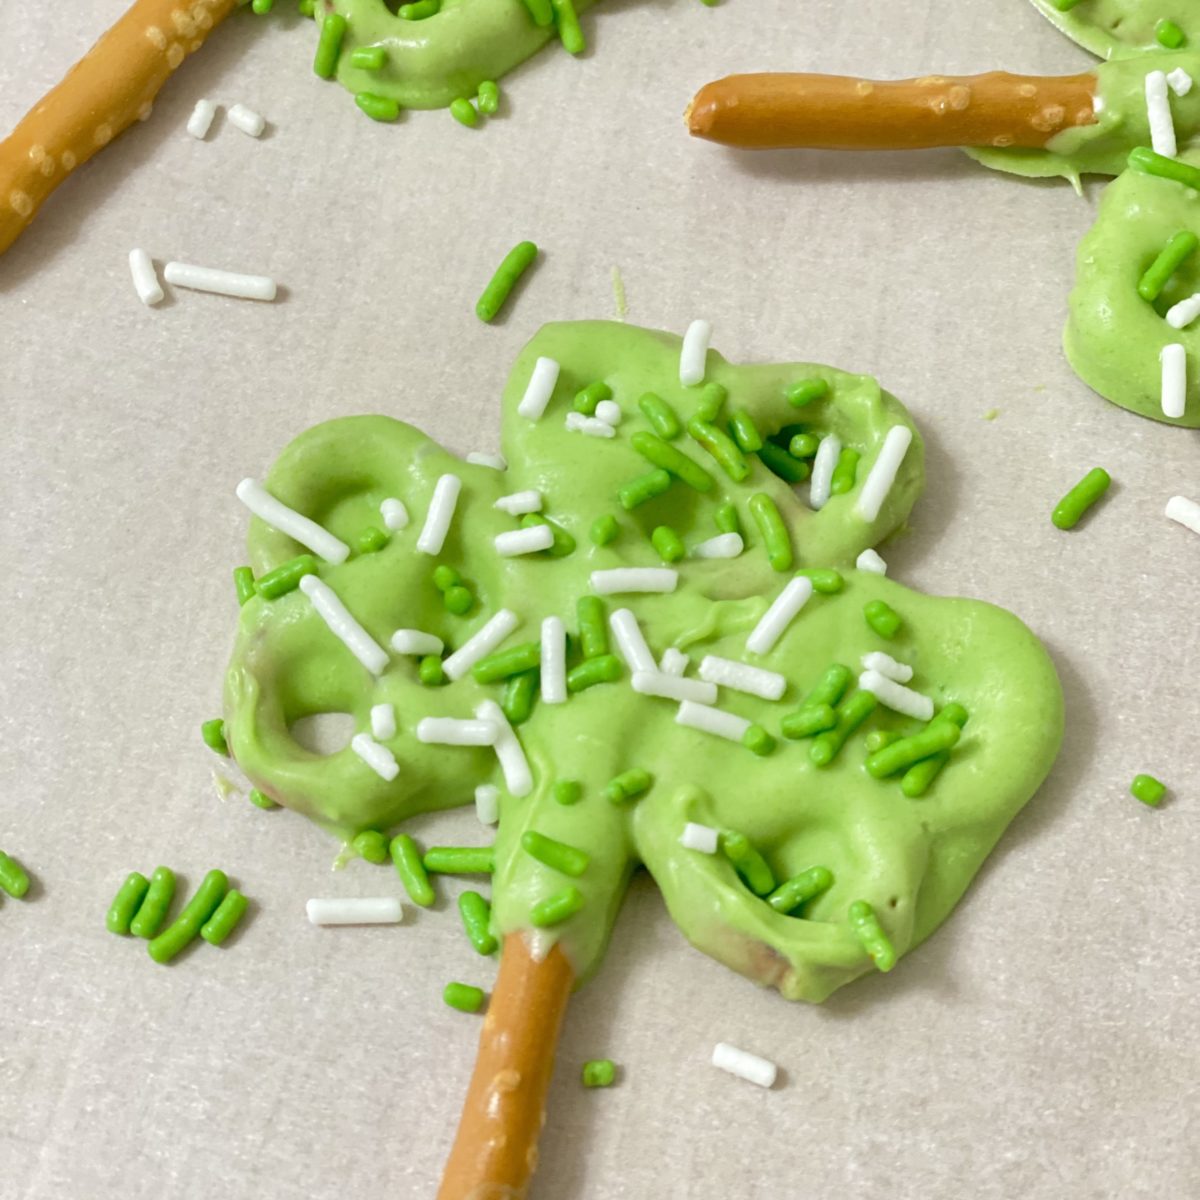 Pretzel Shamrocks are the perfect sweet treat for St. Patrick's Day.